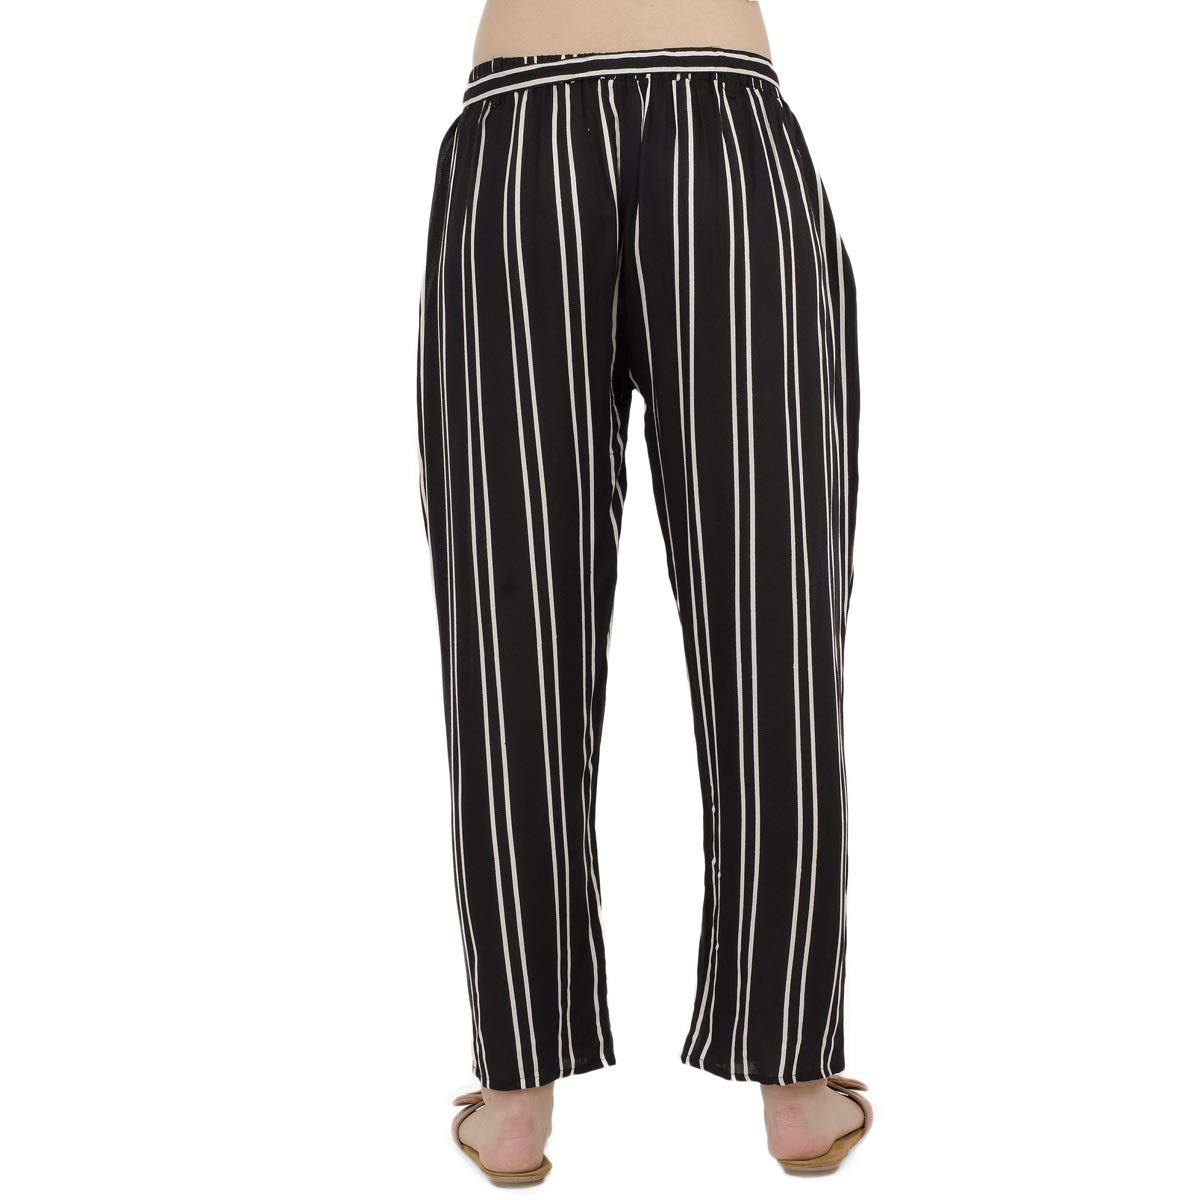 Buy White and Black stripped palazzo pant or trousers Online @ ₹249 ...